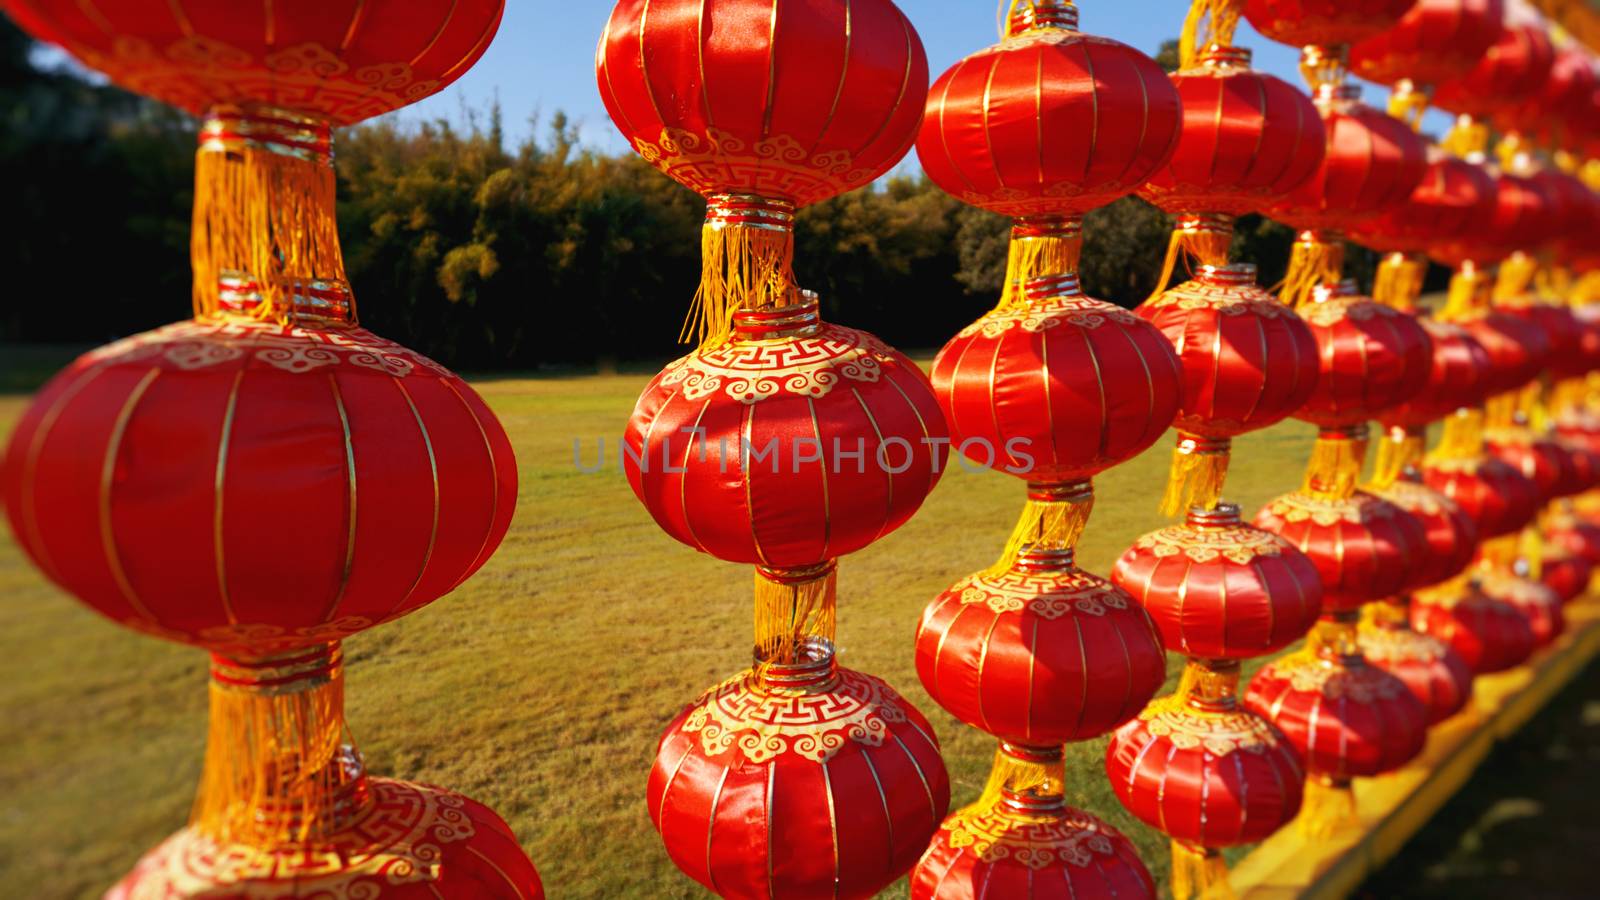 Red Chinese lantern hanging in a row during day time for Chinese new year or Luna New Year celebration in China - Hainan.